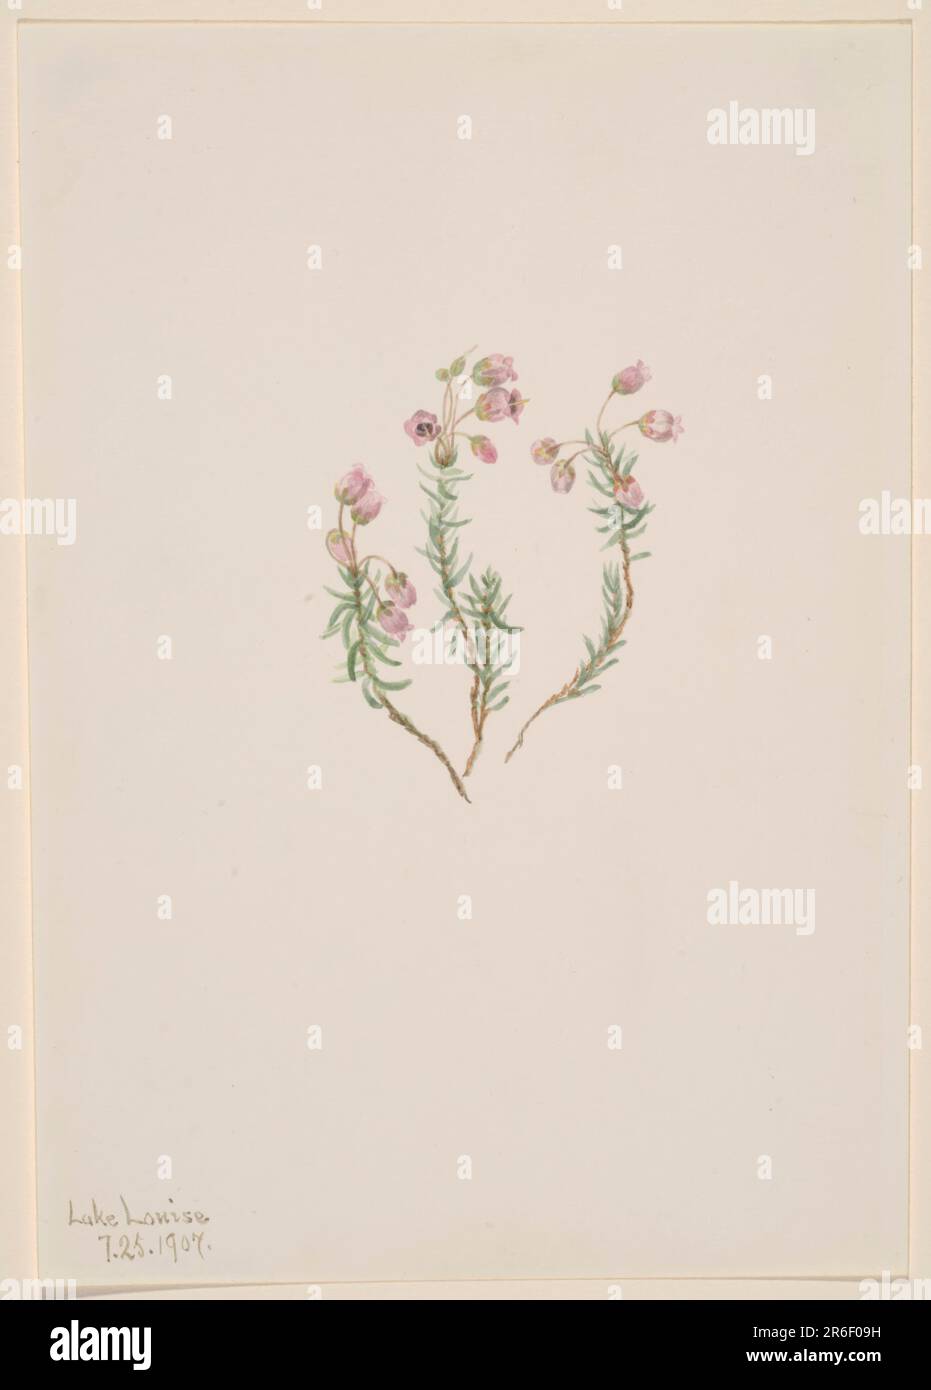 Heather (Phyllodoce intermedia). Date: 1907. Watercolor on paper. Museum: Smithsonian American Art Museum. Stock Photo